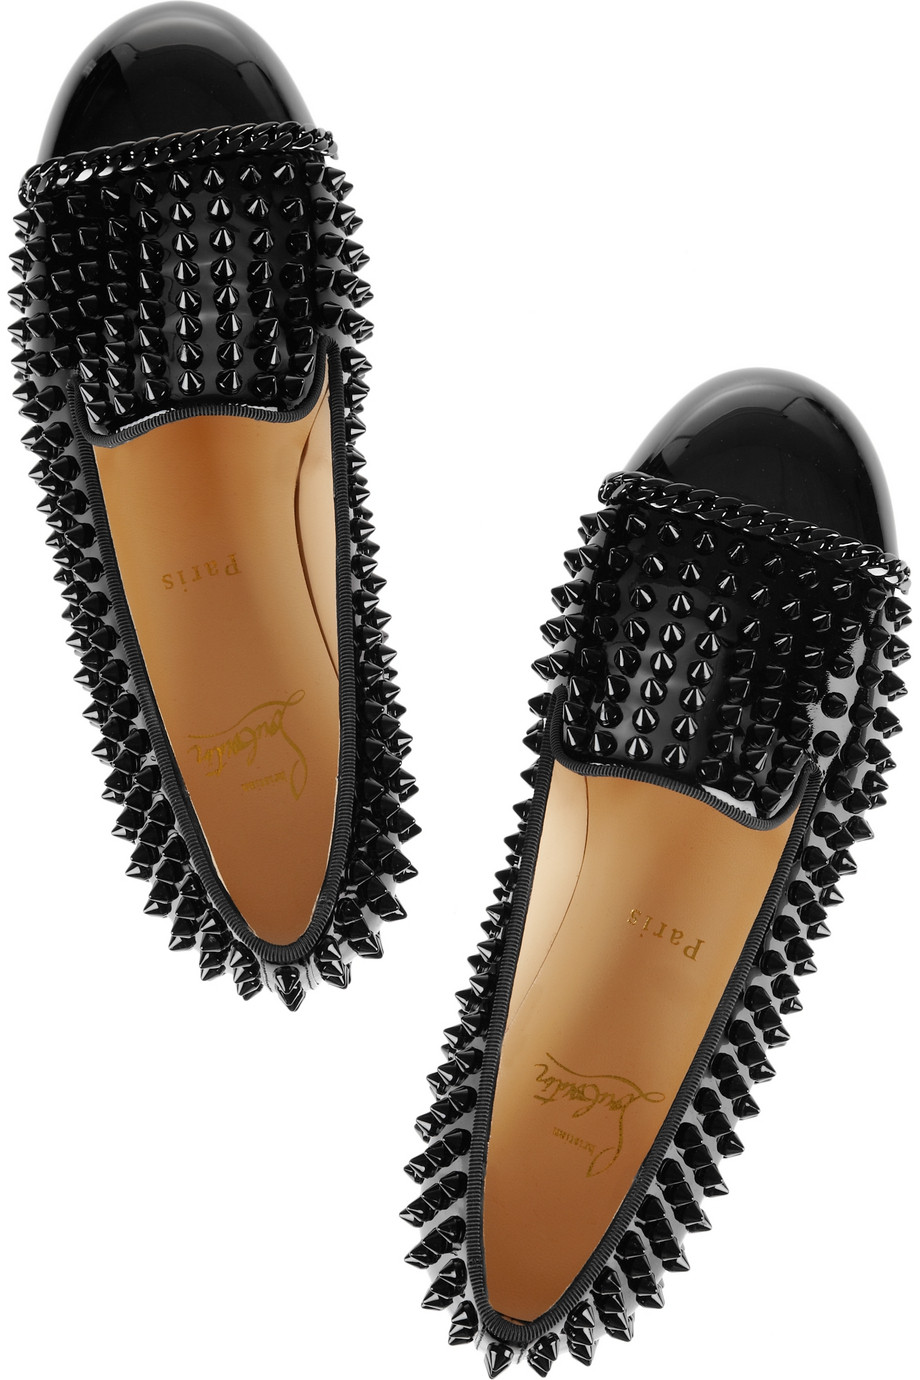 Christian louboutin Glitz Spiked Patent leather Loafers in Black ...  